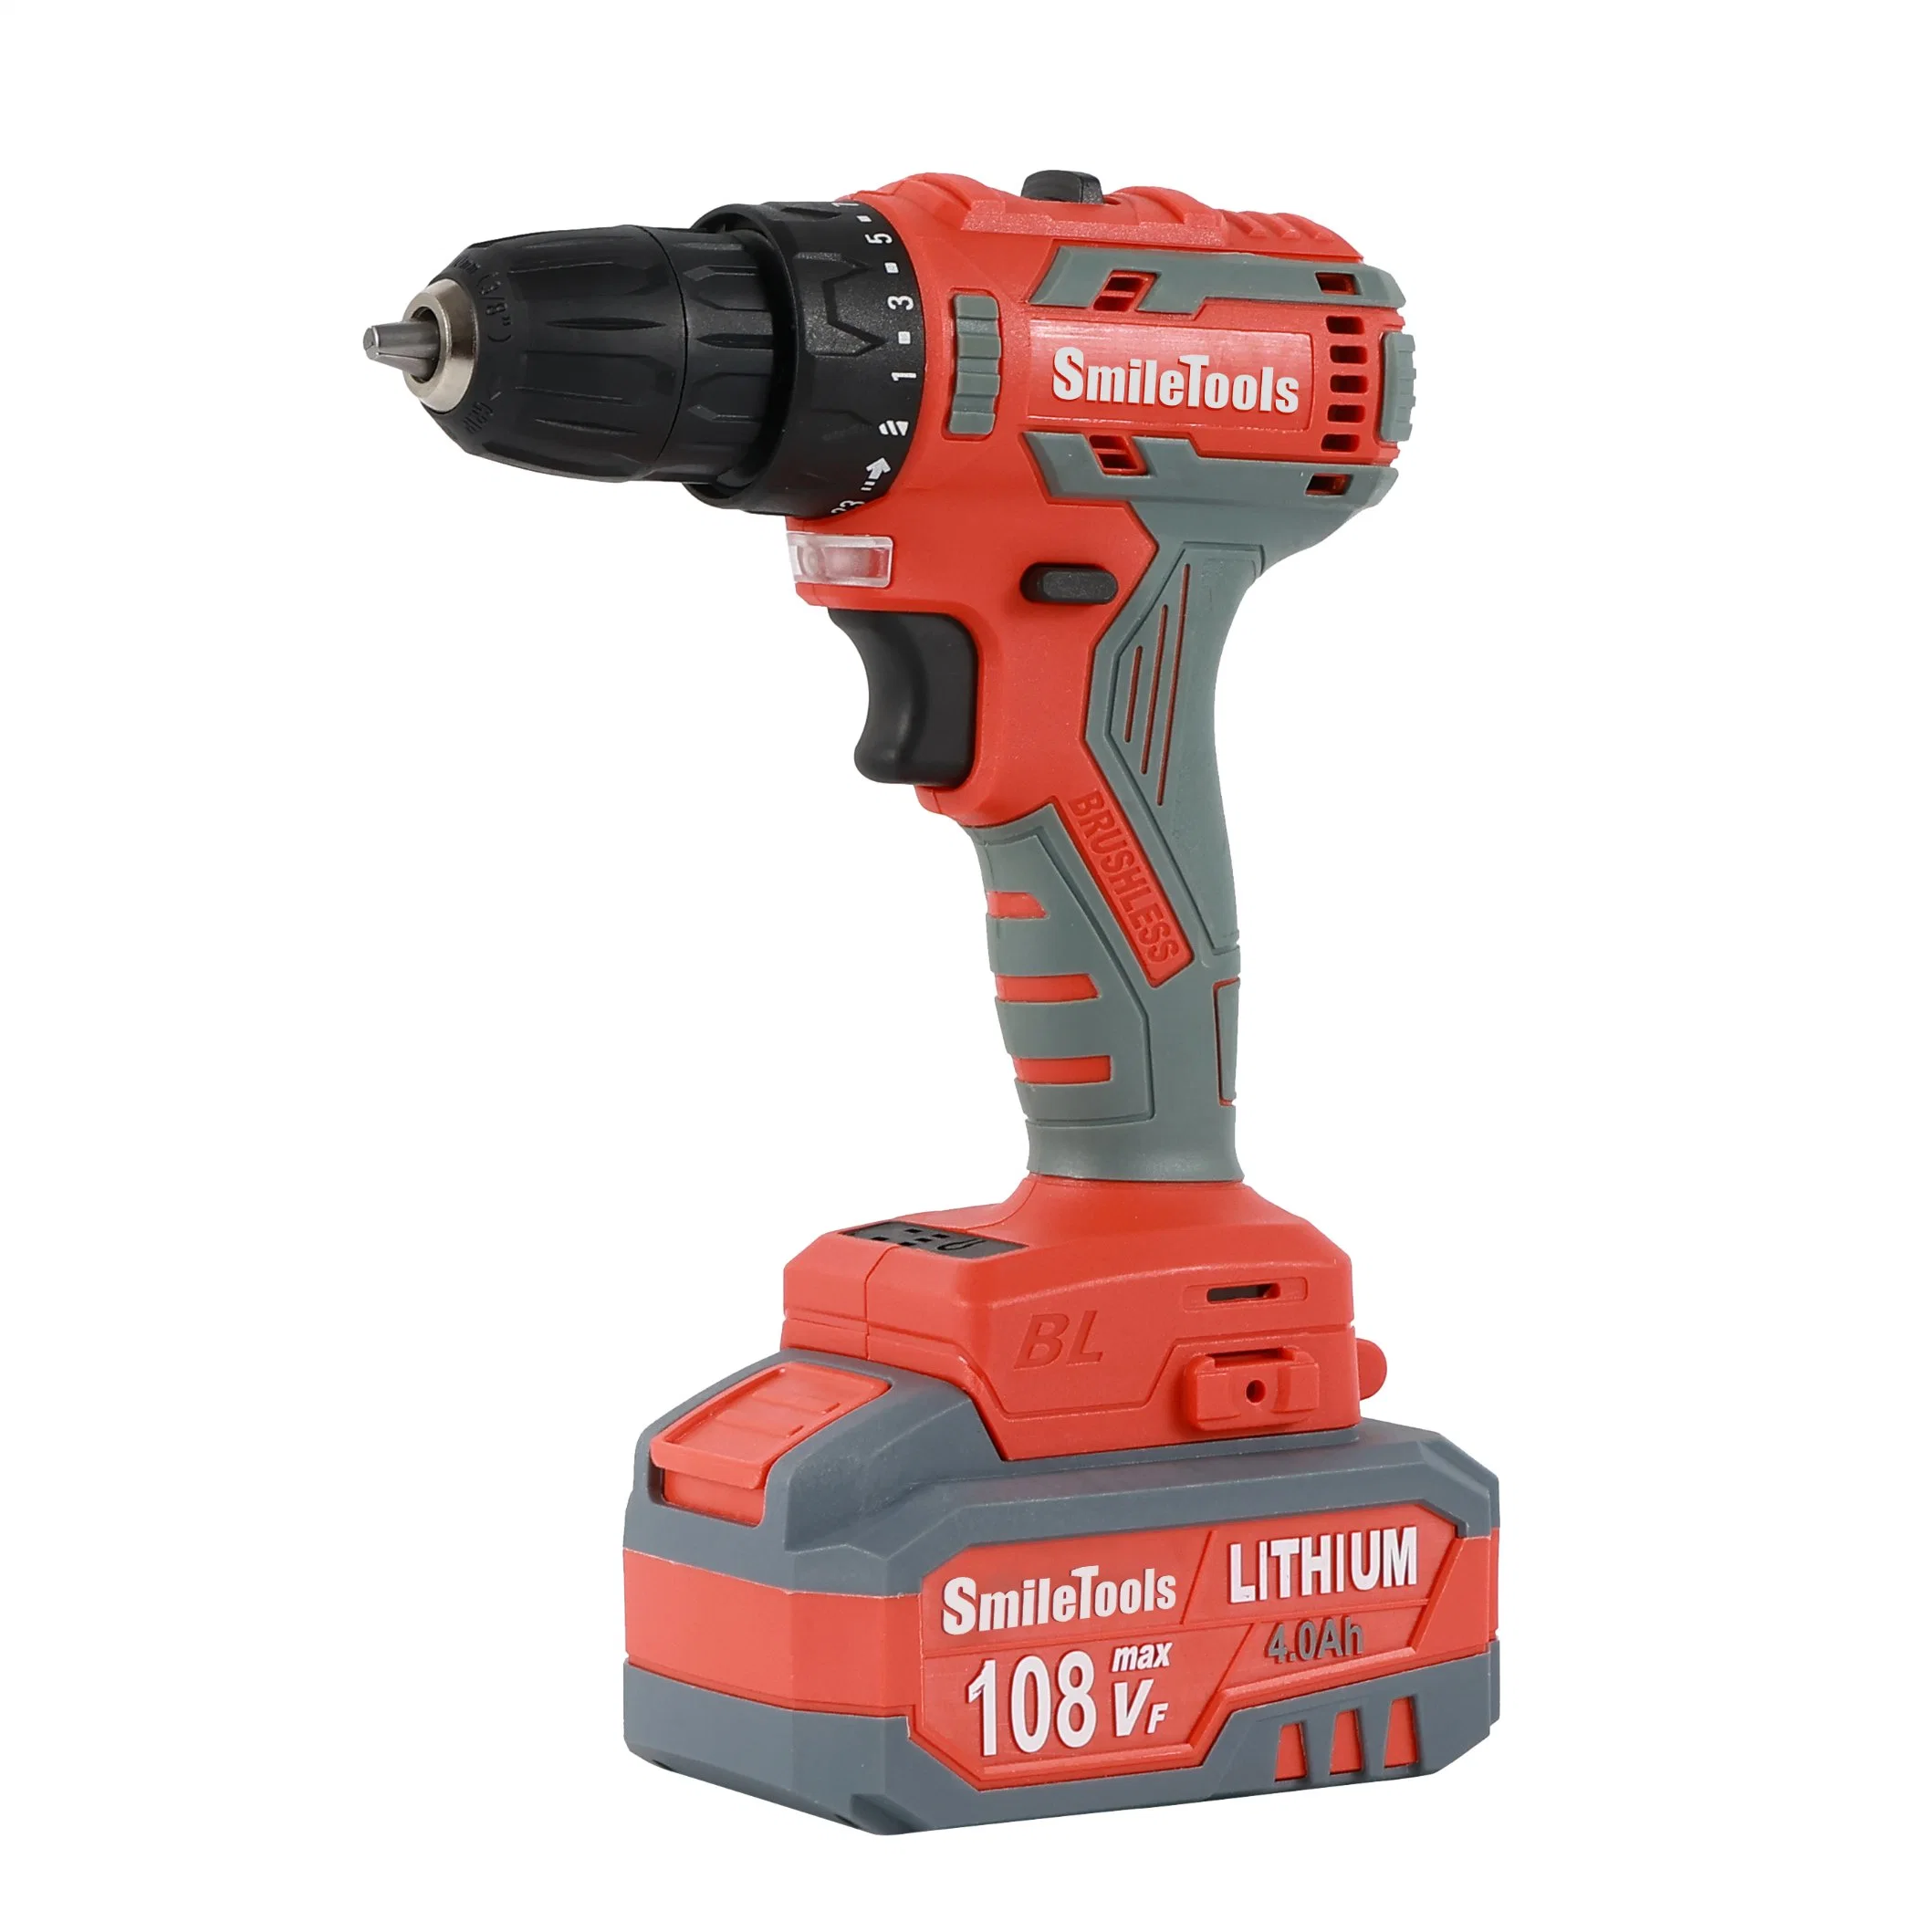 20V Wireless Impact Drill Cordless High Powered Electric Power Diamond Core Drill Tools for Sale Competitive Price